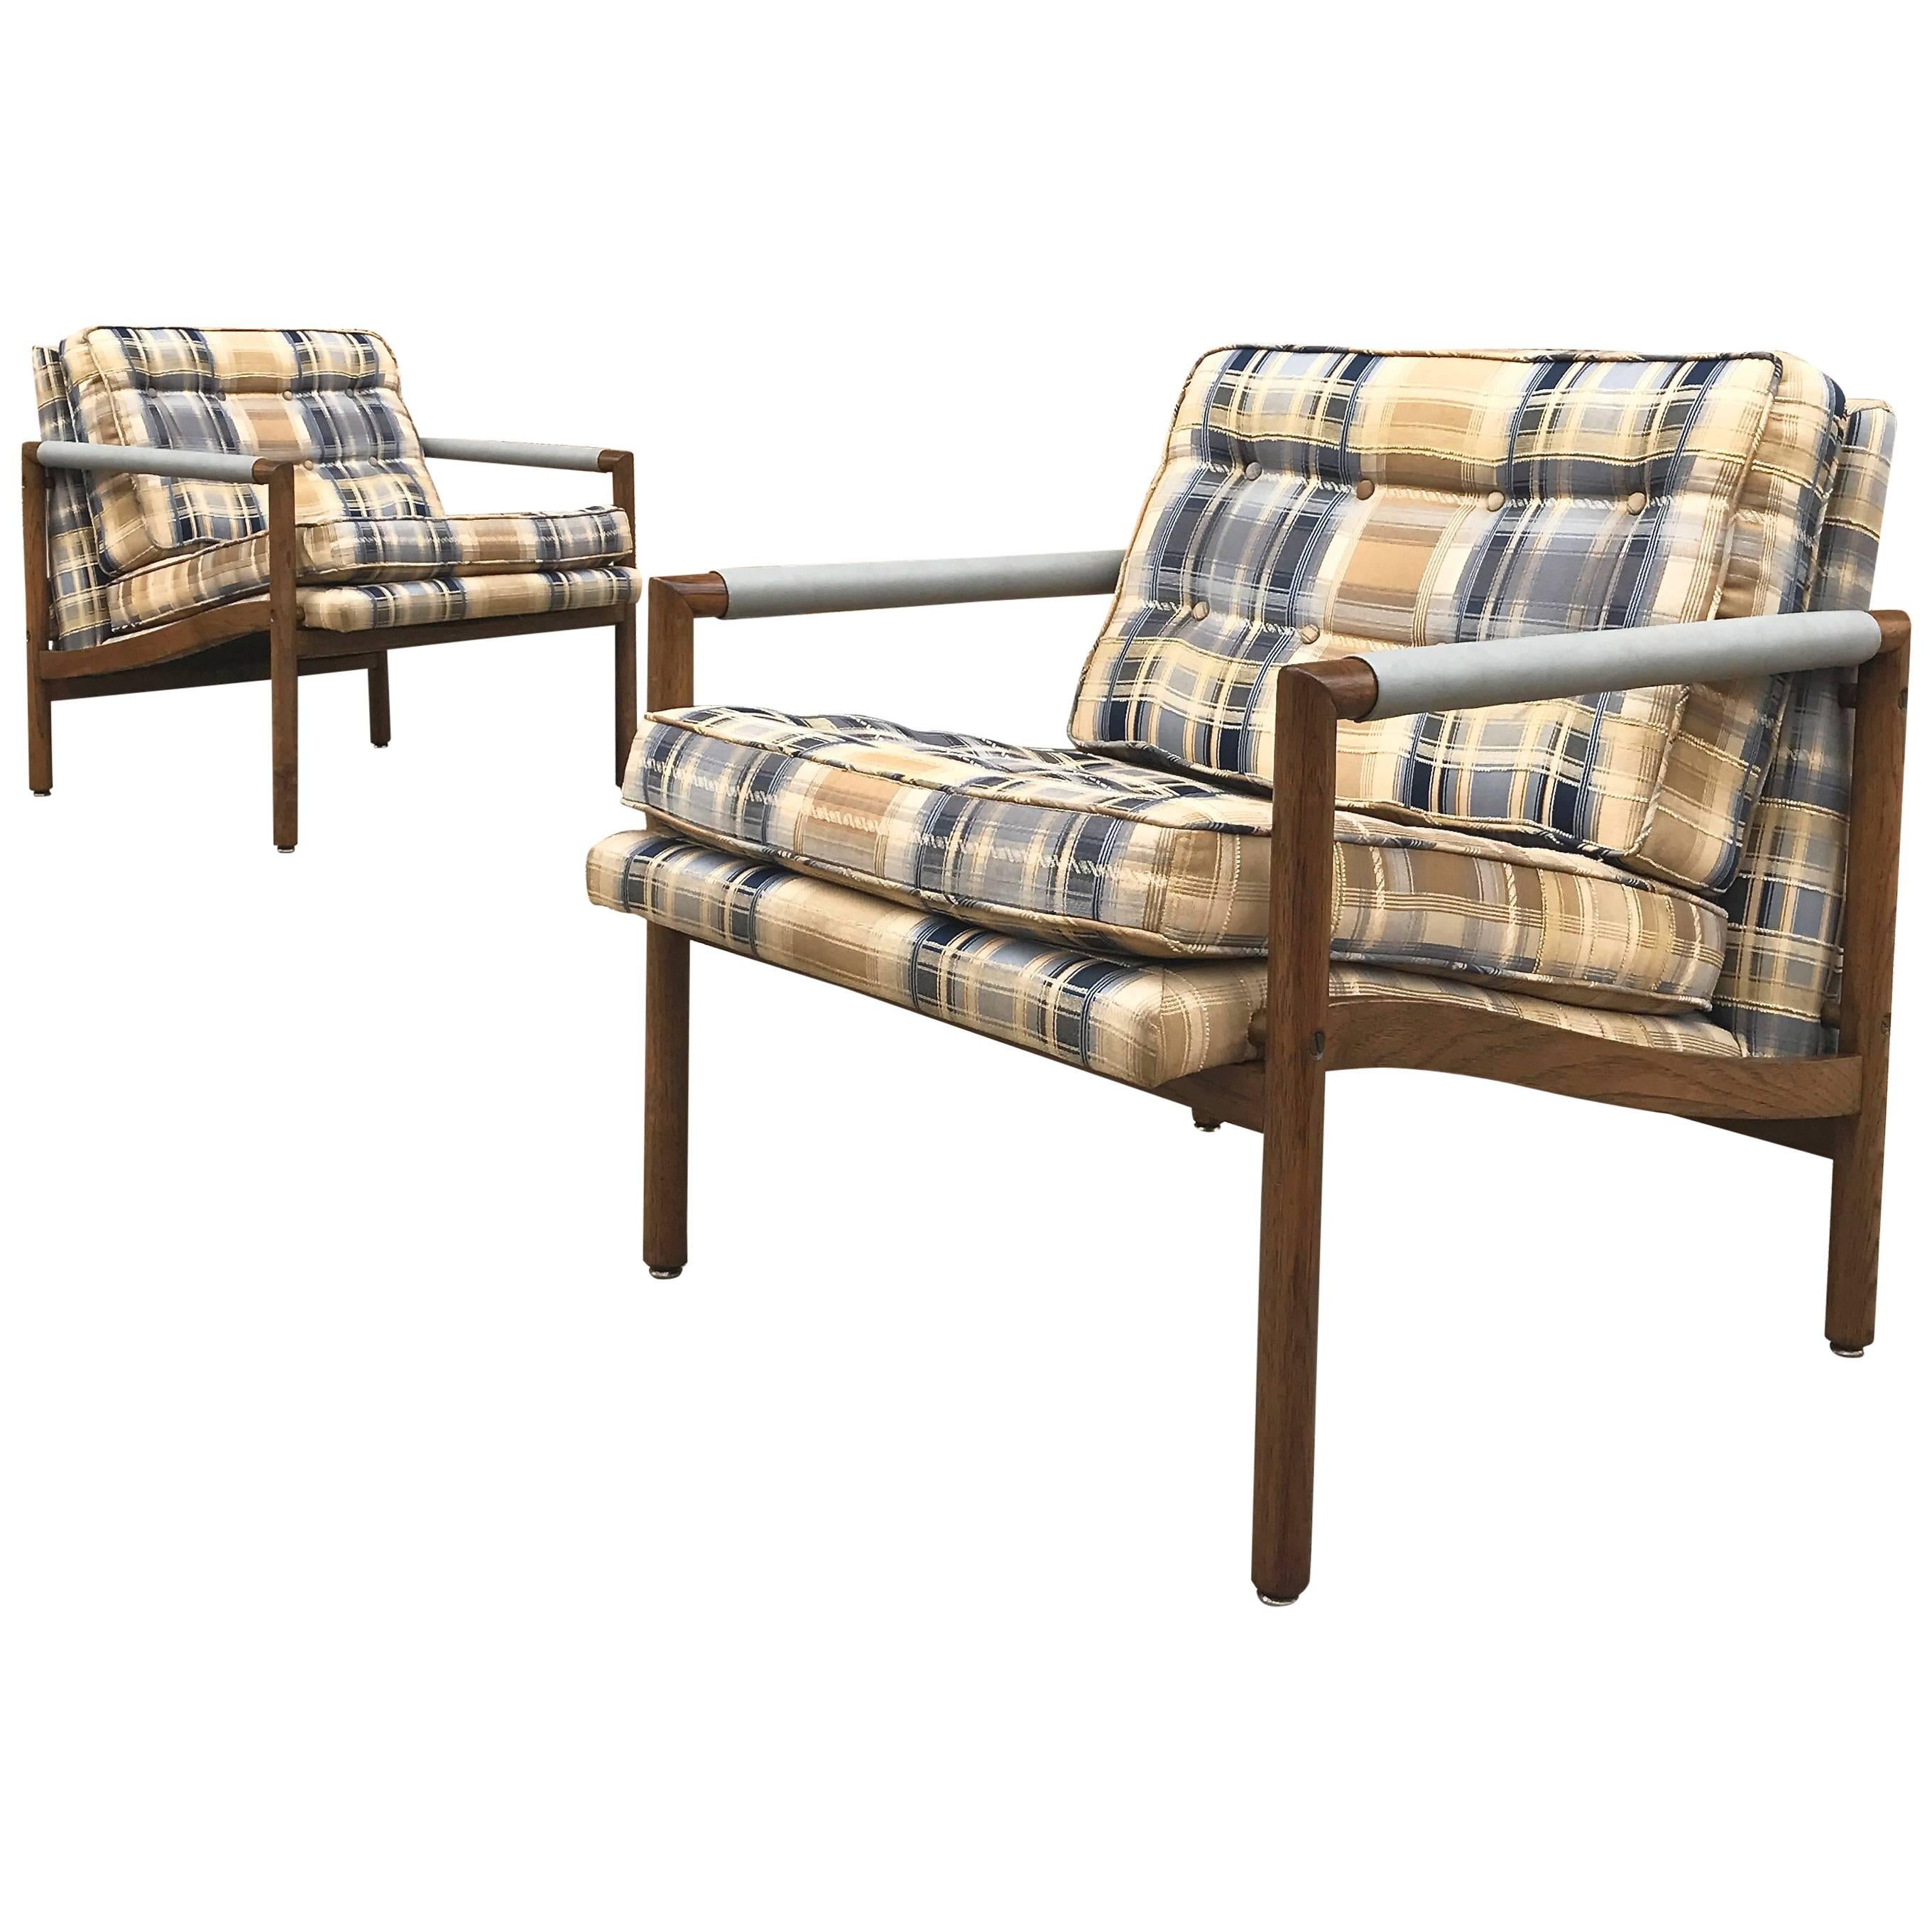 Pair of Mid-Century Modern Harvey Probber Style Upholstered Club Chairs